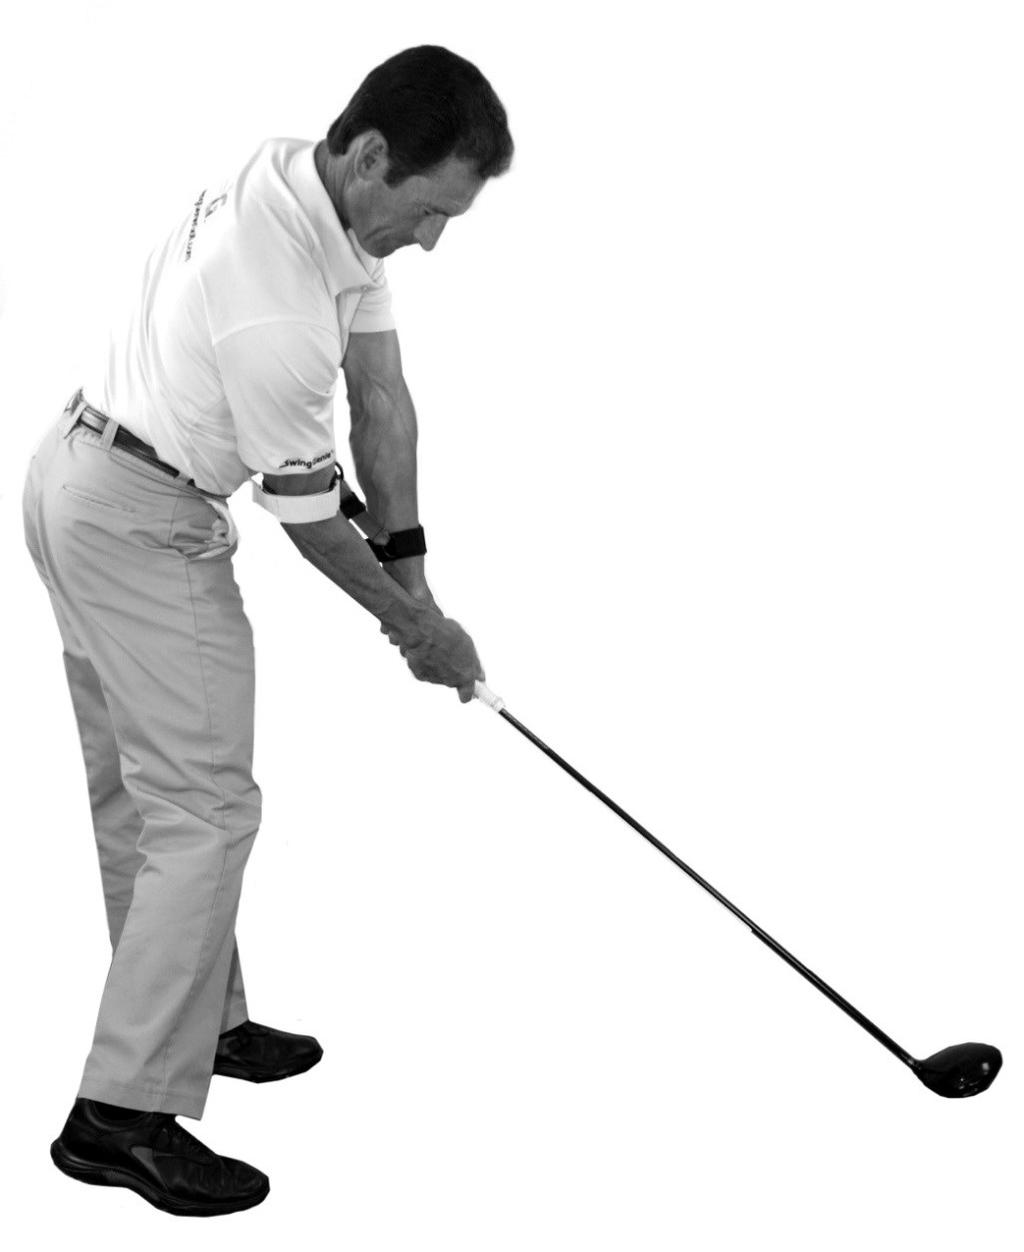 The Golf Swing In the full swing at impact, the trailing arm should be slightly bent and both arms should be connected.